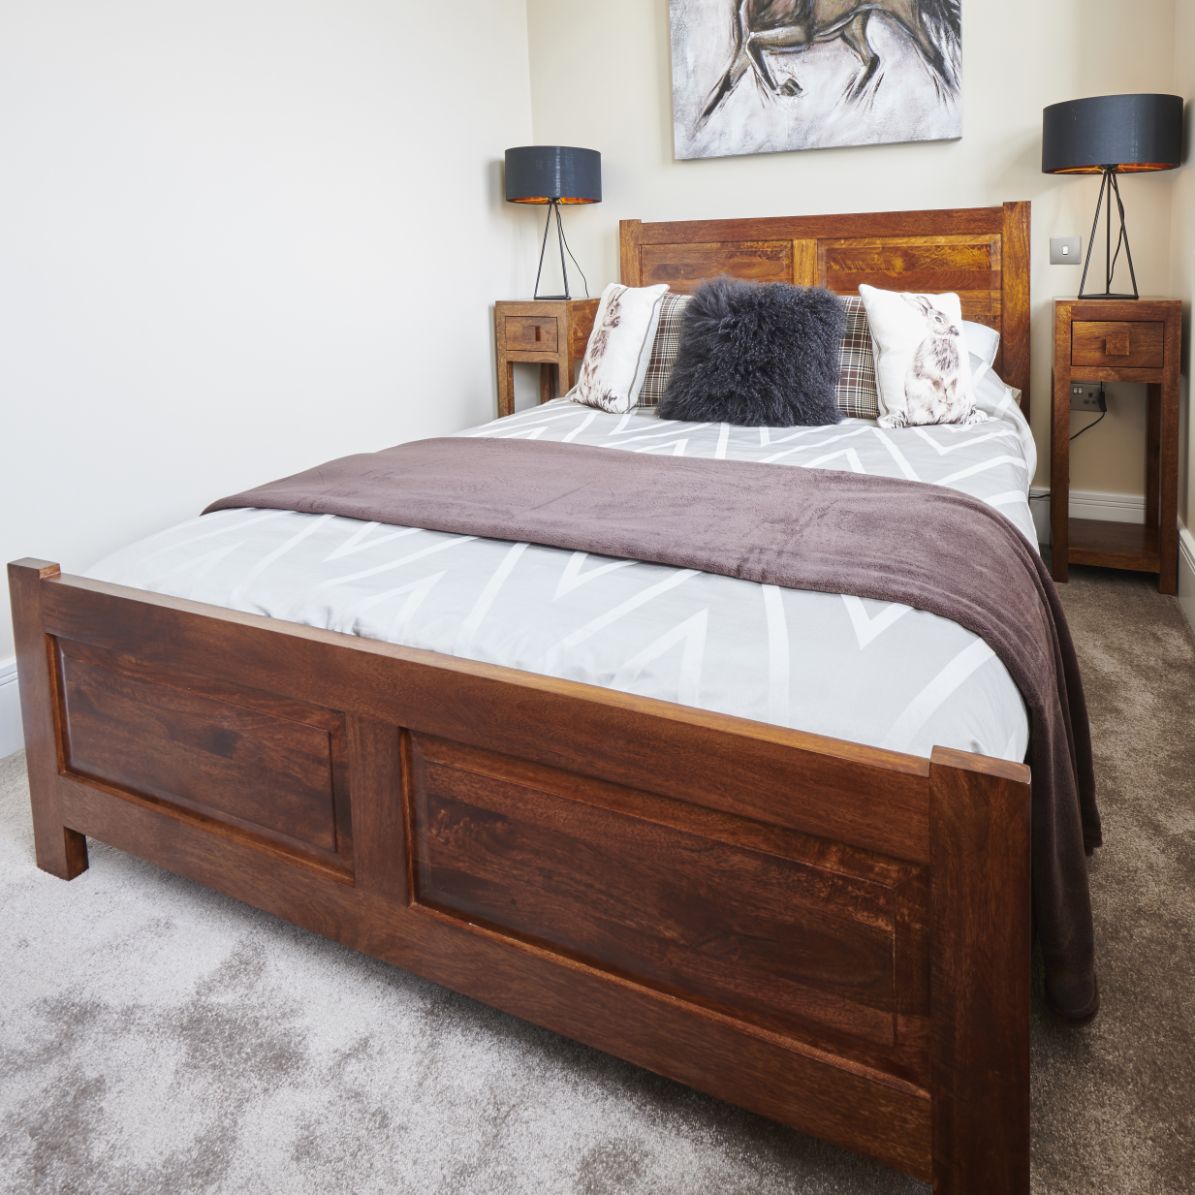 Wood Beds Single Double King Size, Solid Wooden Bed Frame King Size